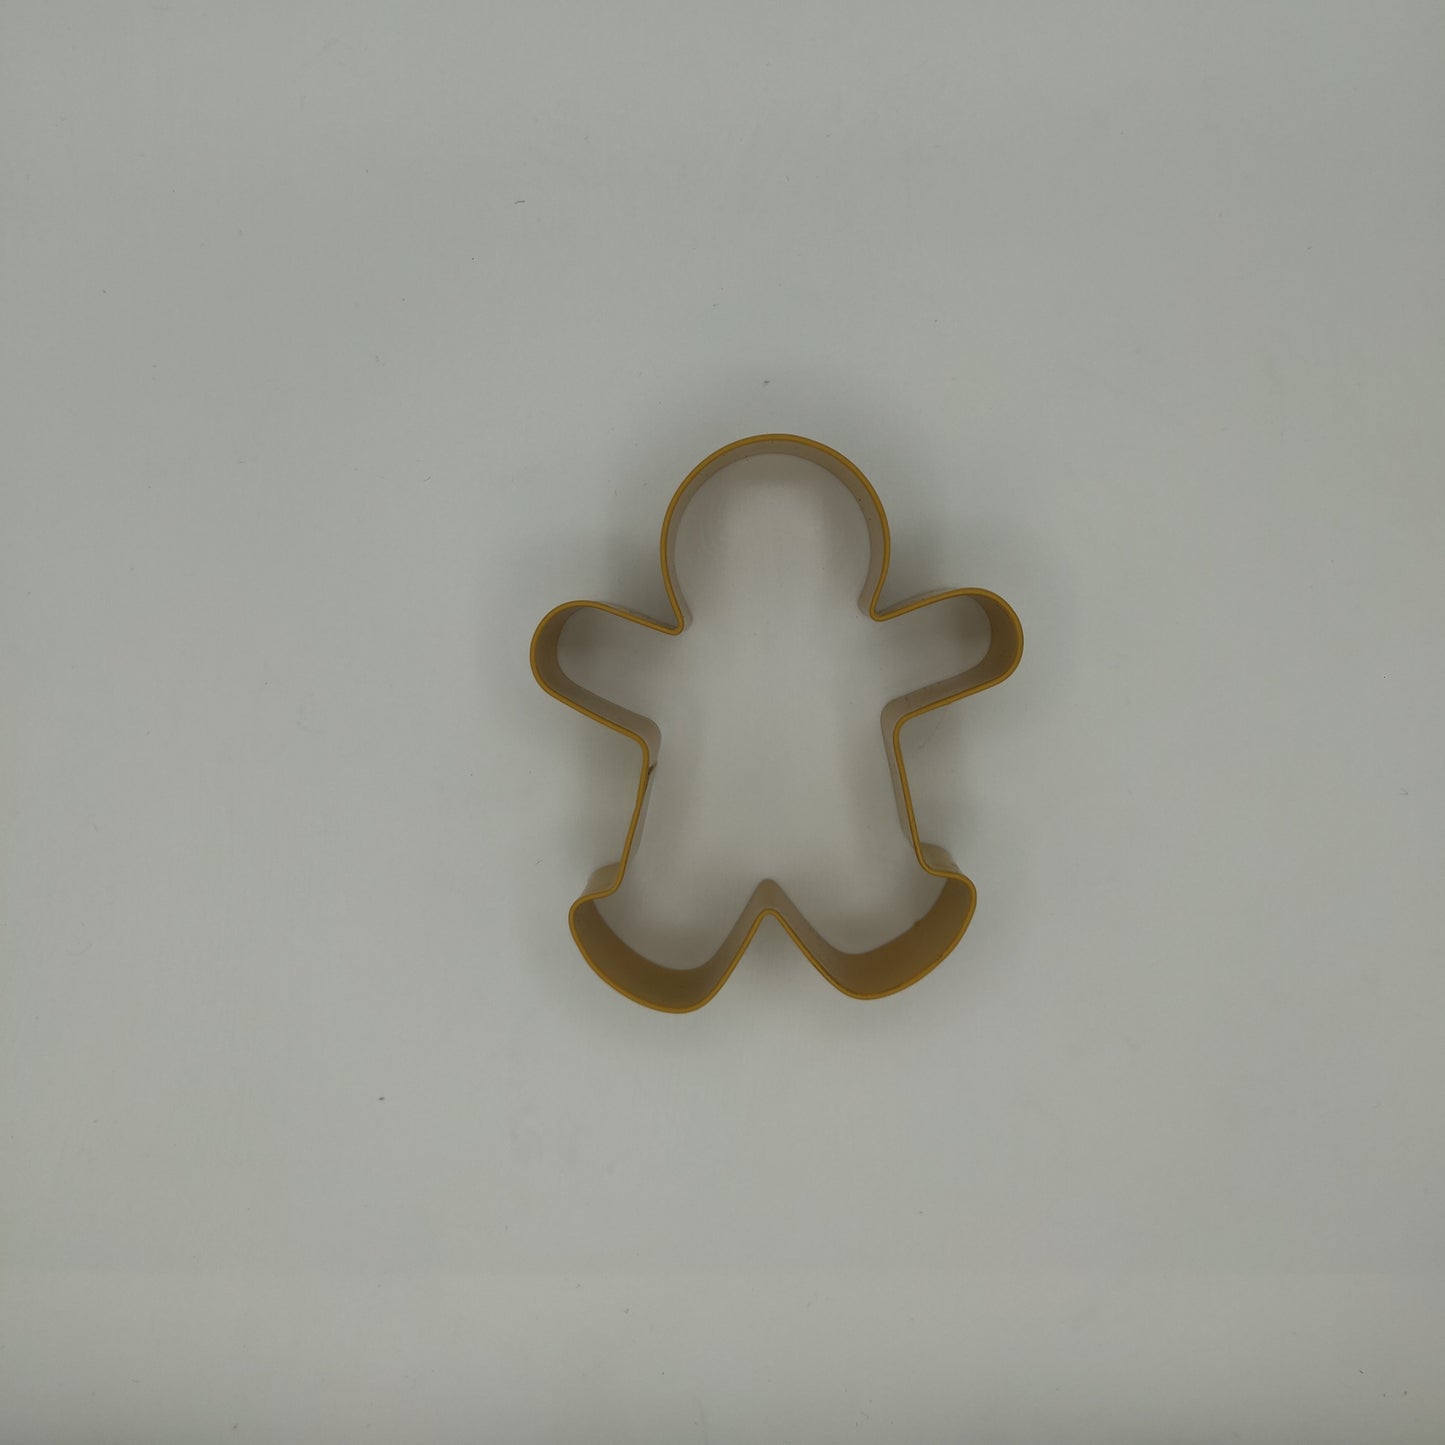 Tan Coated Gingerbread Person Cookie Cutter (3 1/2")